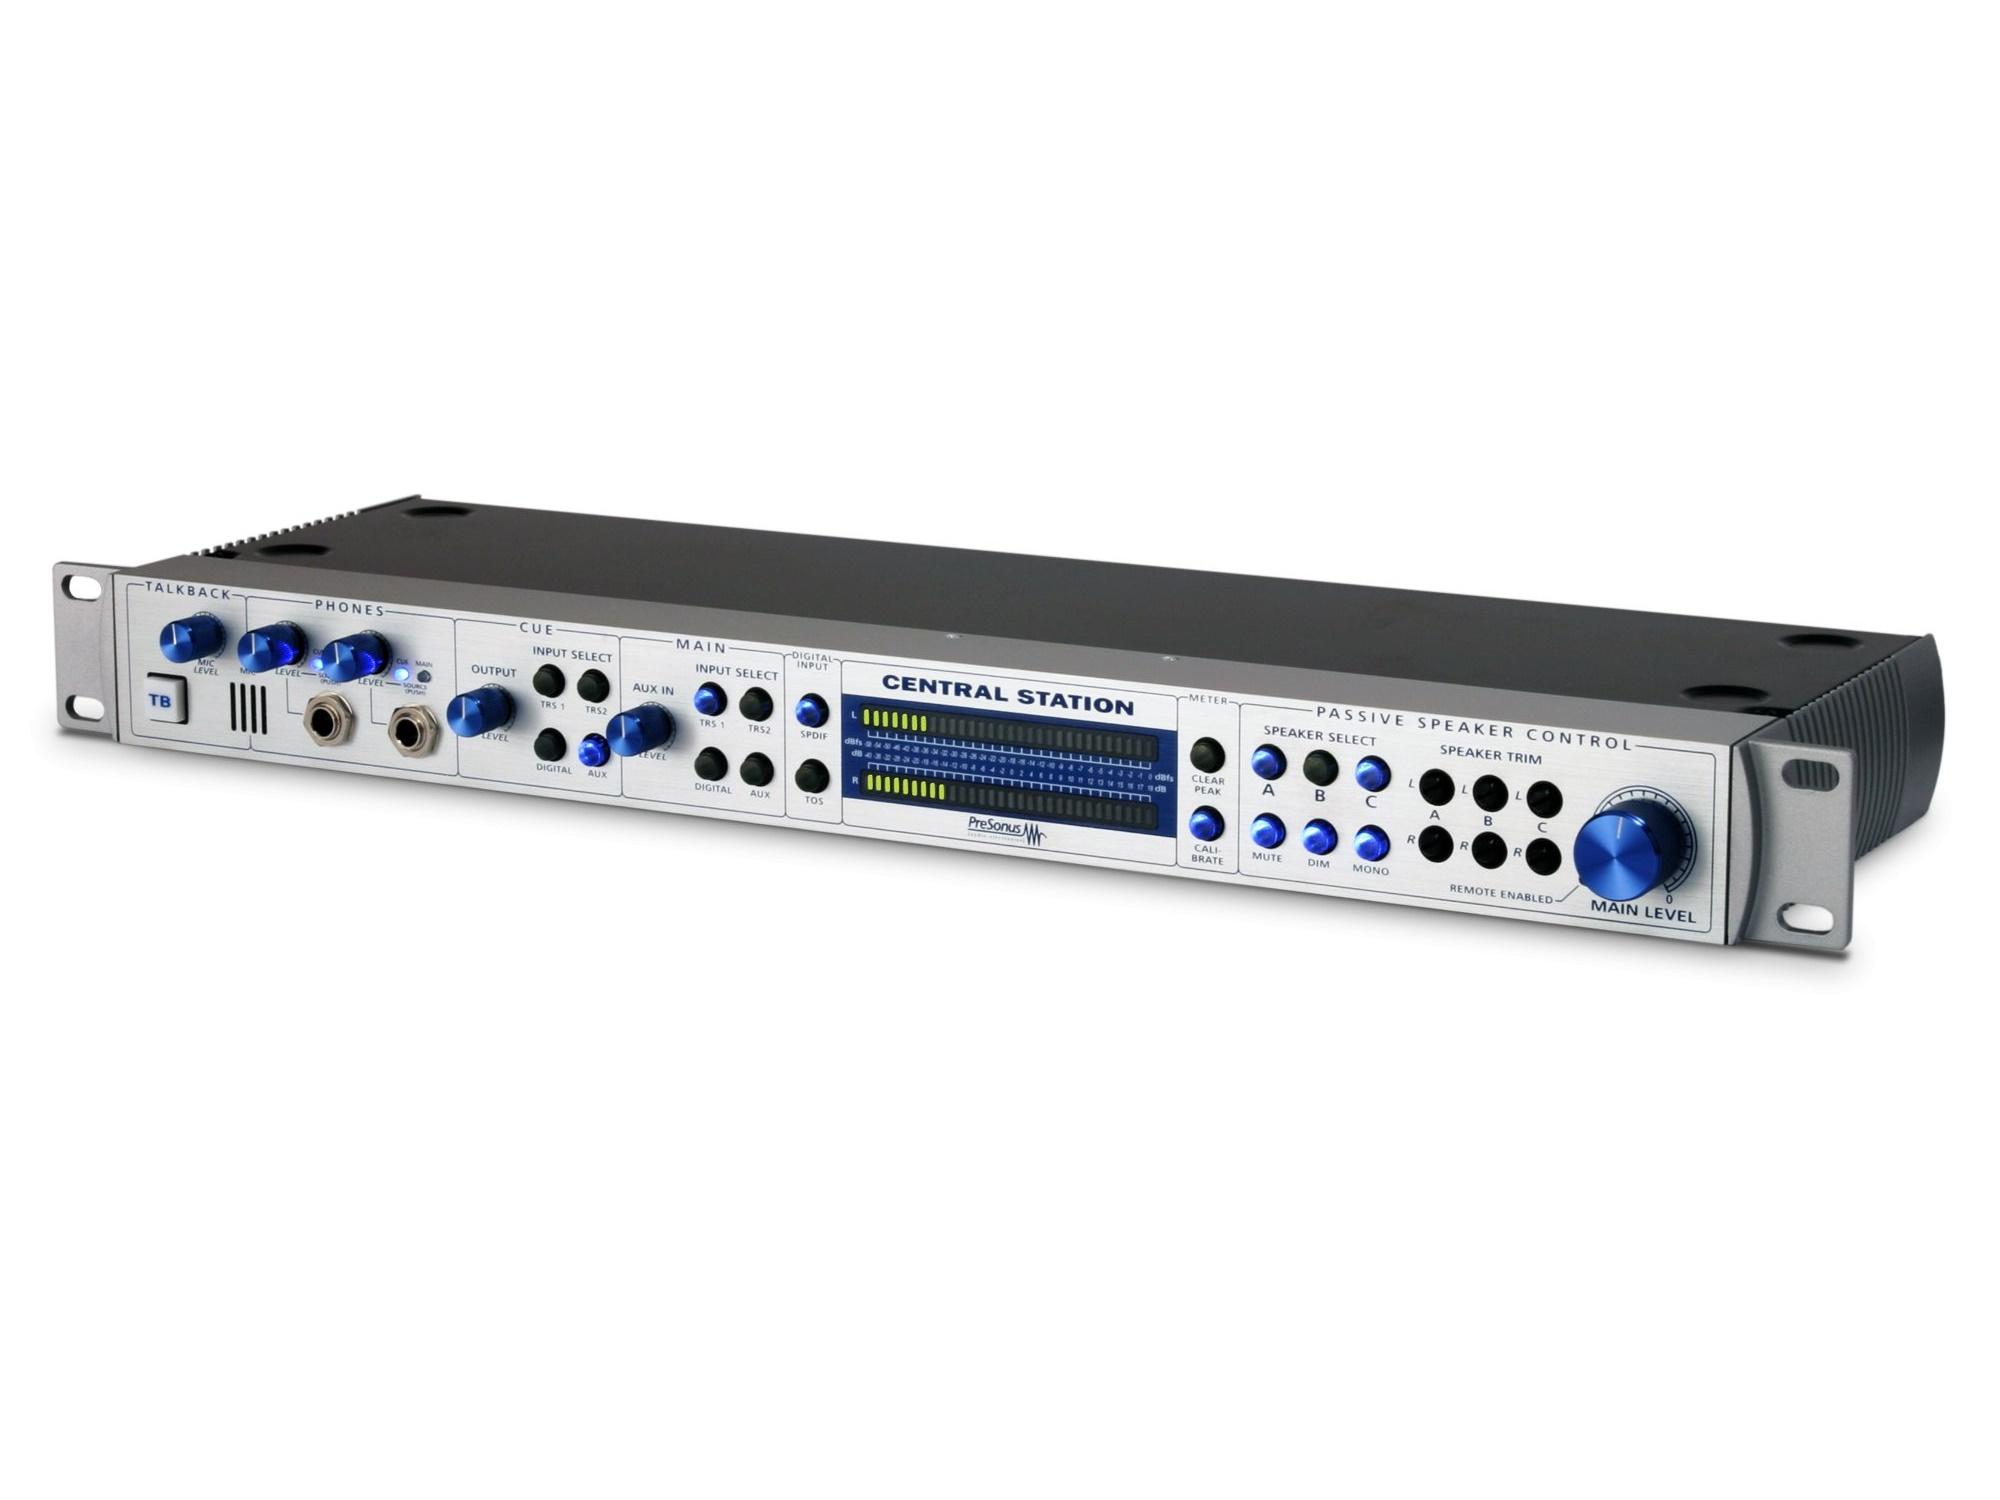 Central Station Plus Studio Control Center with Remote by PreSonus